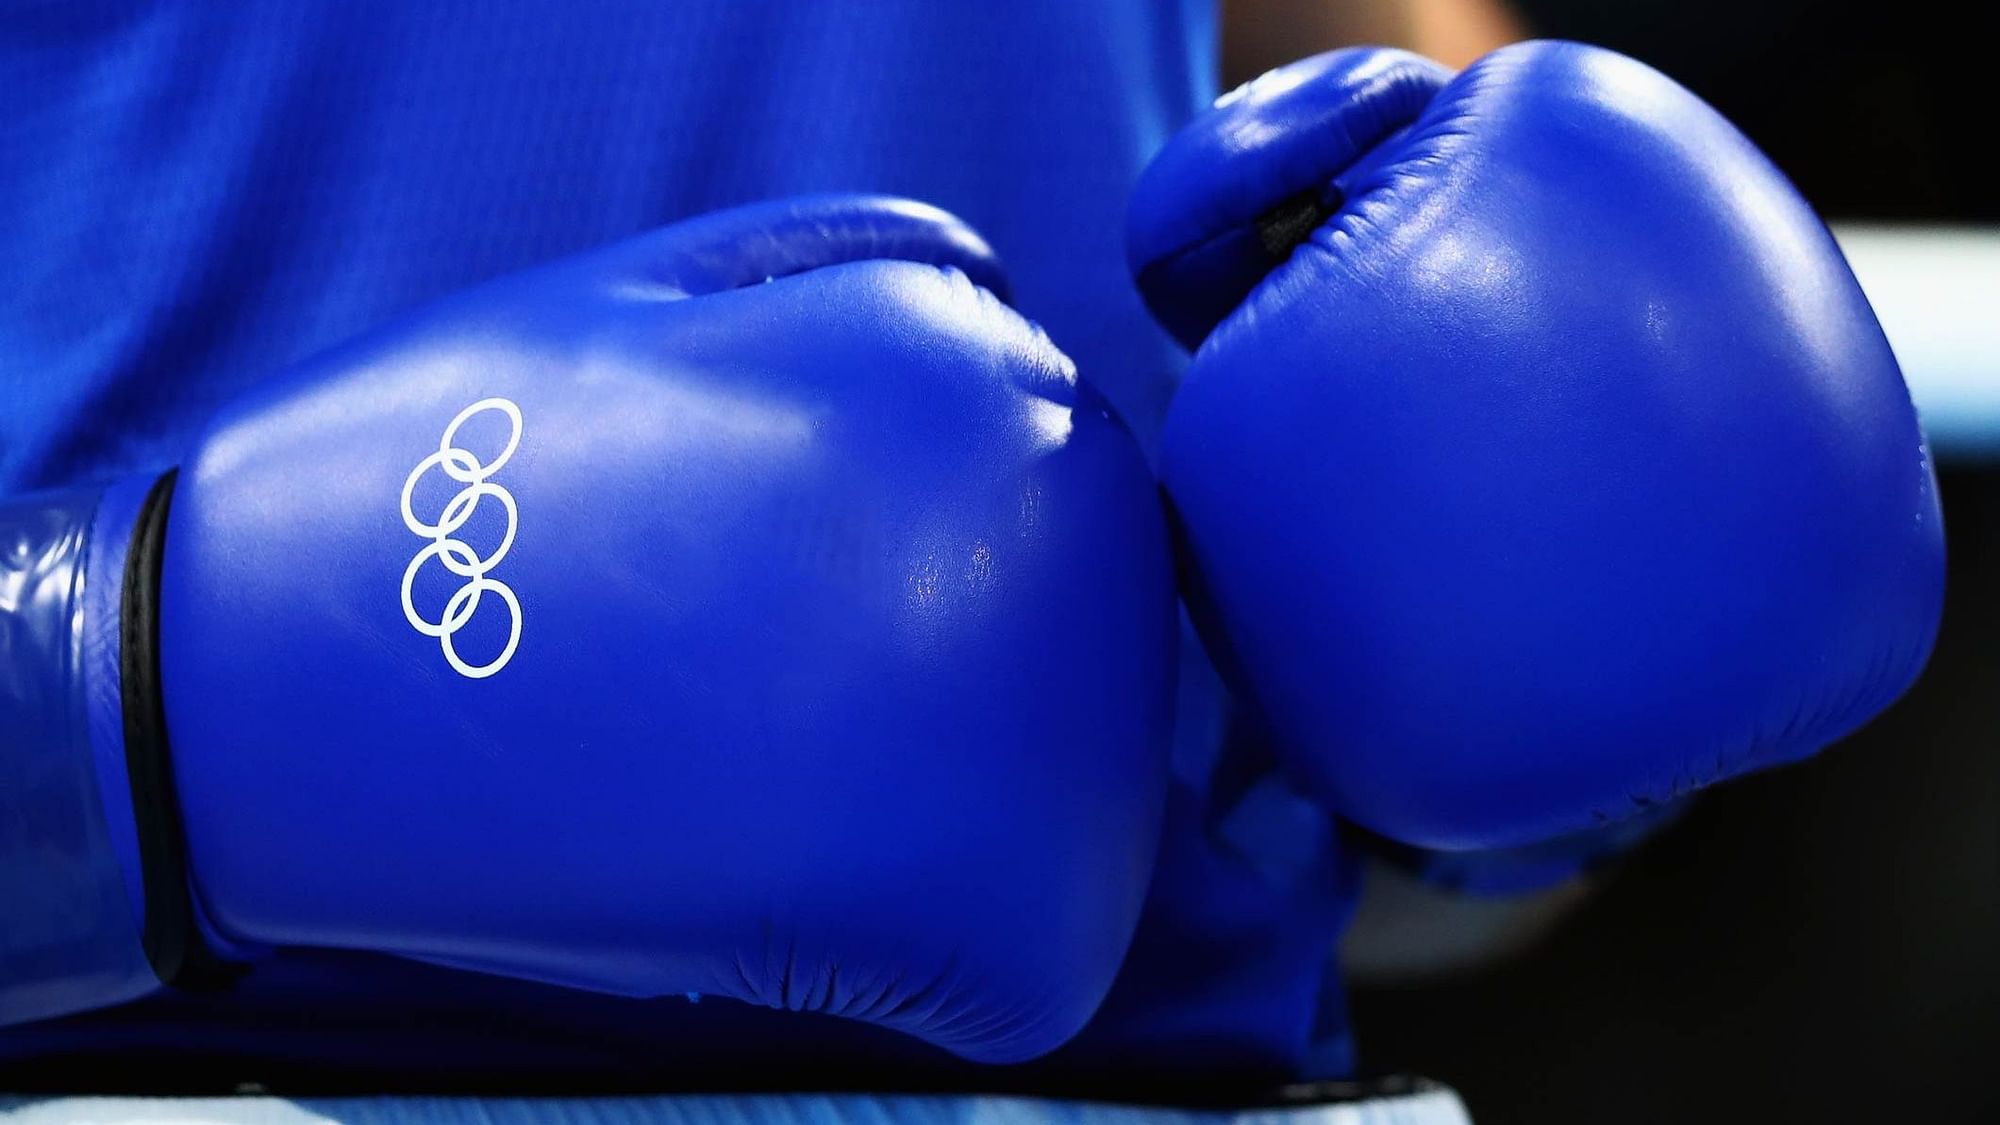 The Boxing Federation of India (BFI) has offered to host the Tournament, which was to be held from February 3-14 in Wuhan.